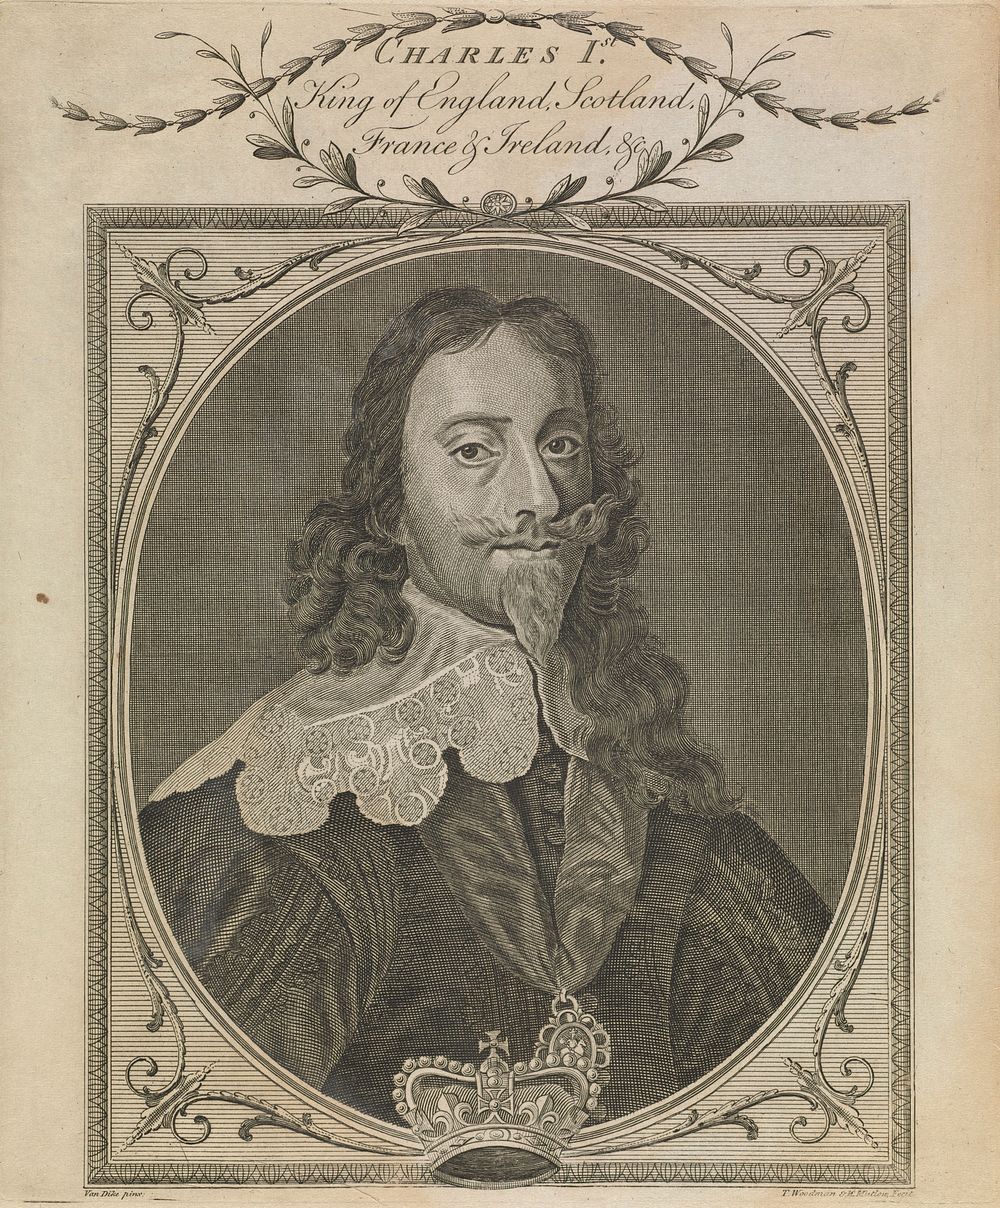 King Charles I. Engraving by T. Woodman and H. Mutlow, ca. 1784, after A. van Dyck.